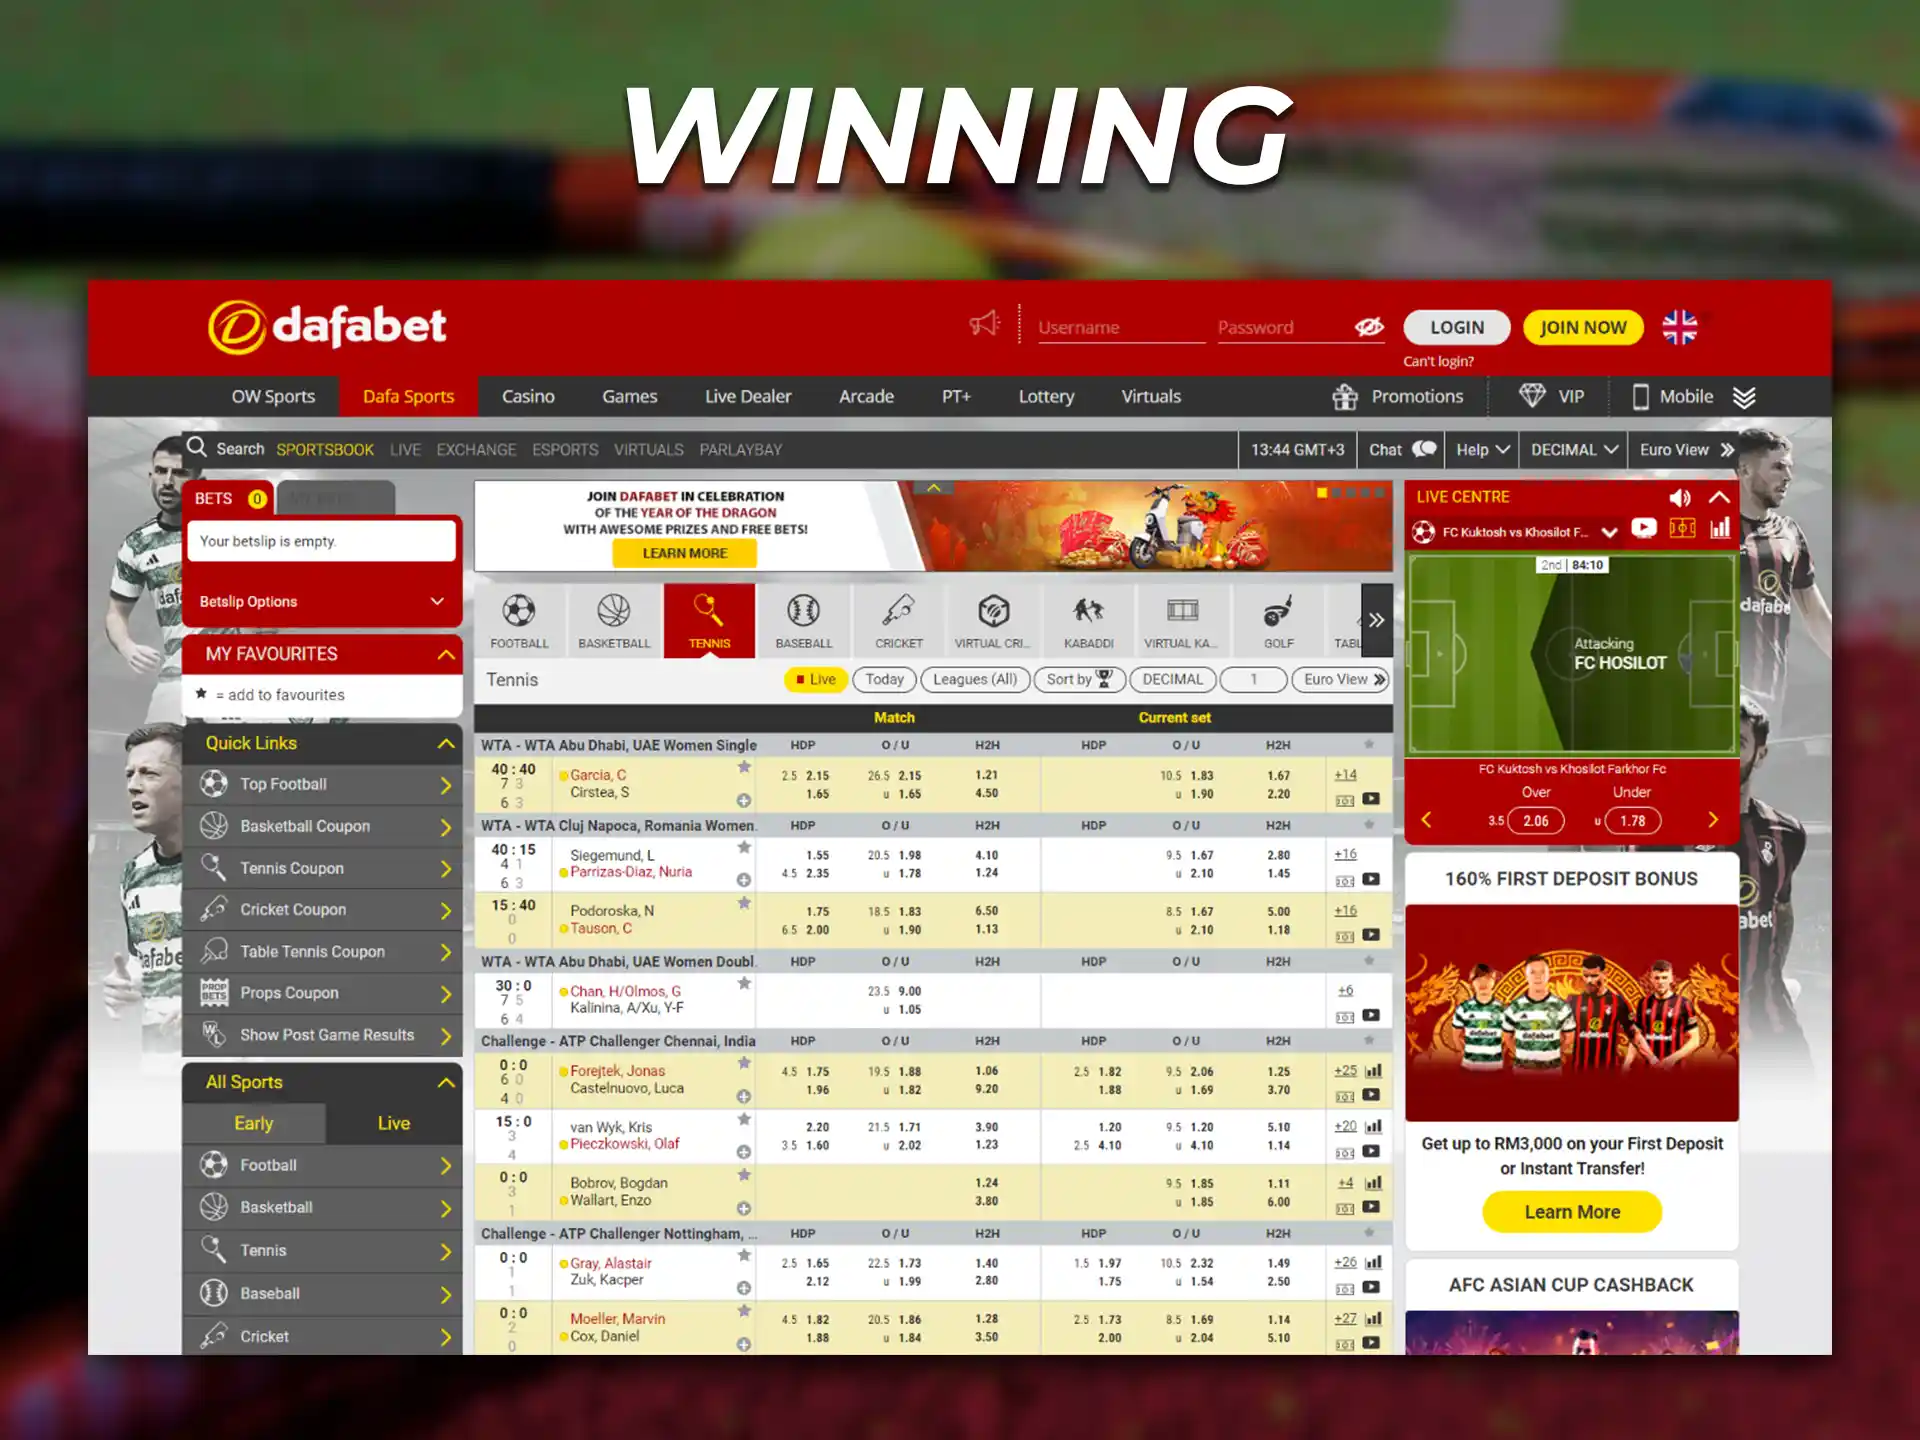 At Bookmakers, you can bet on the winners of specific tennis matches.